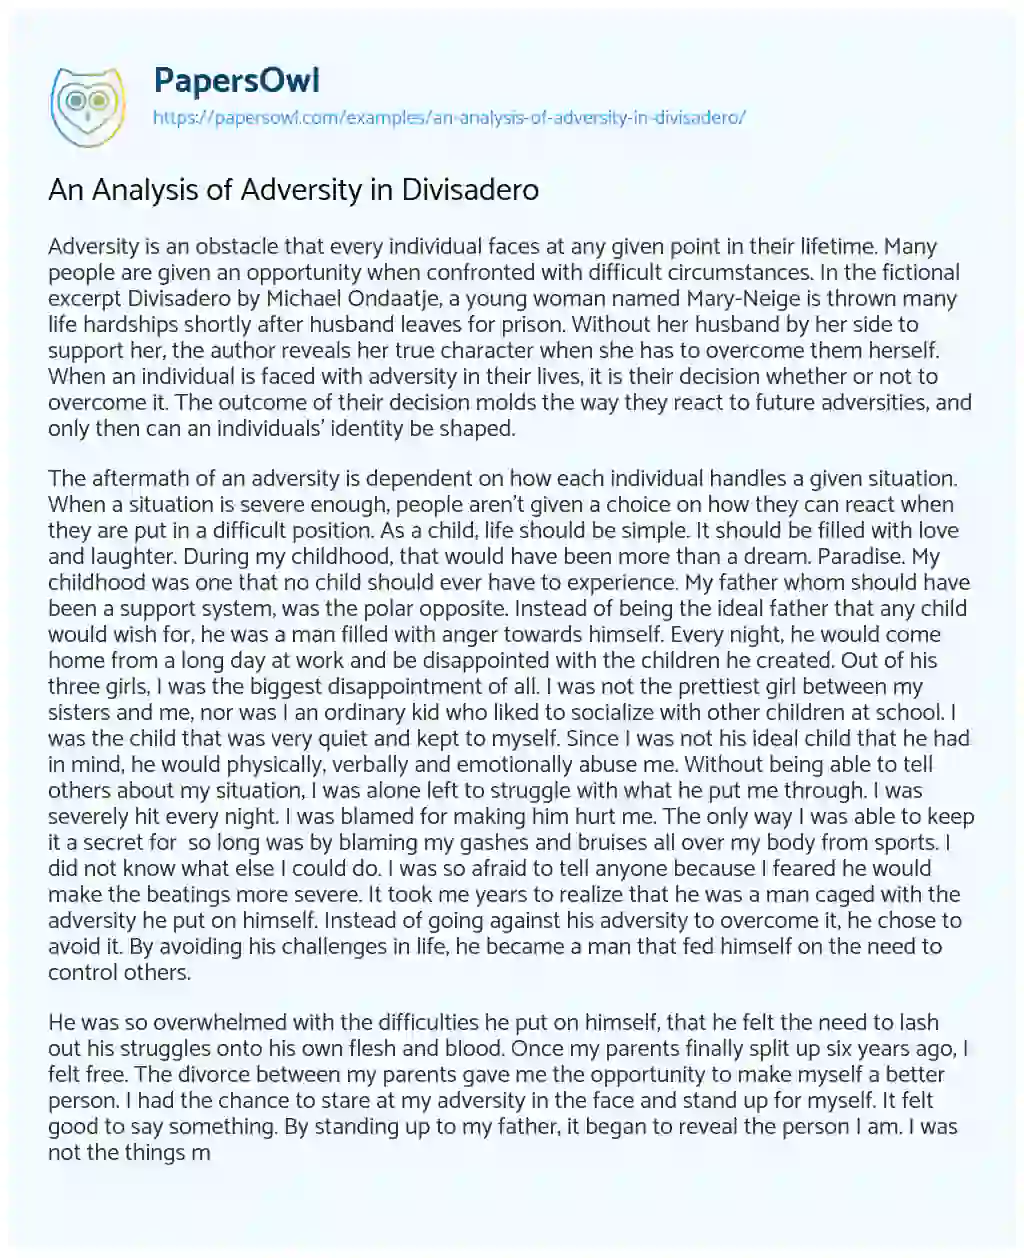 Essay on An Analysis of Adversity in Divisadero